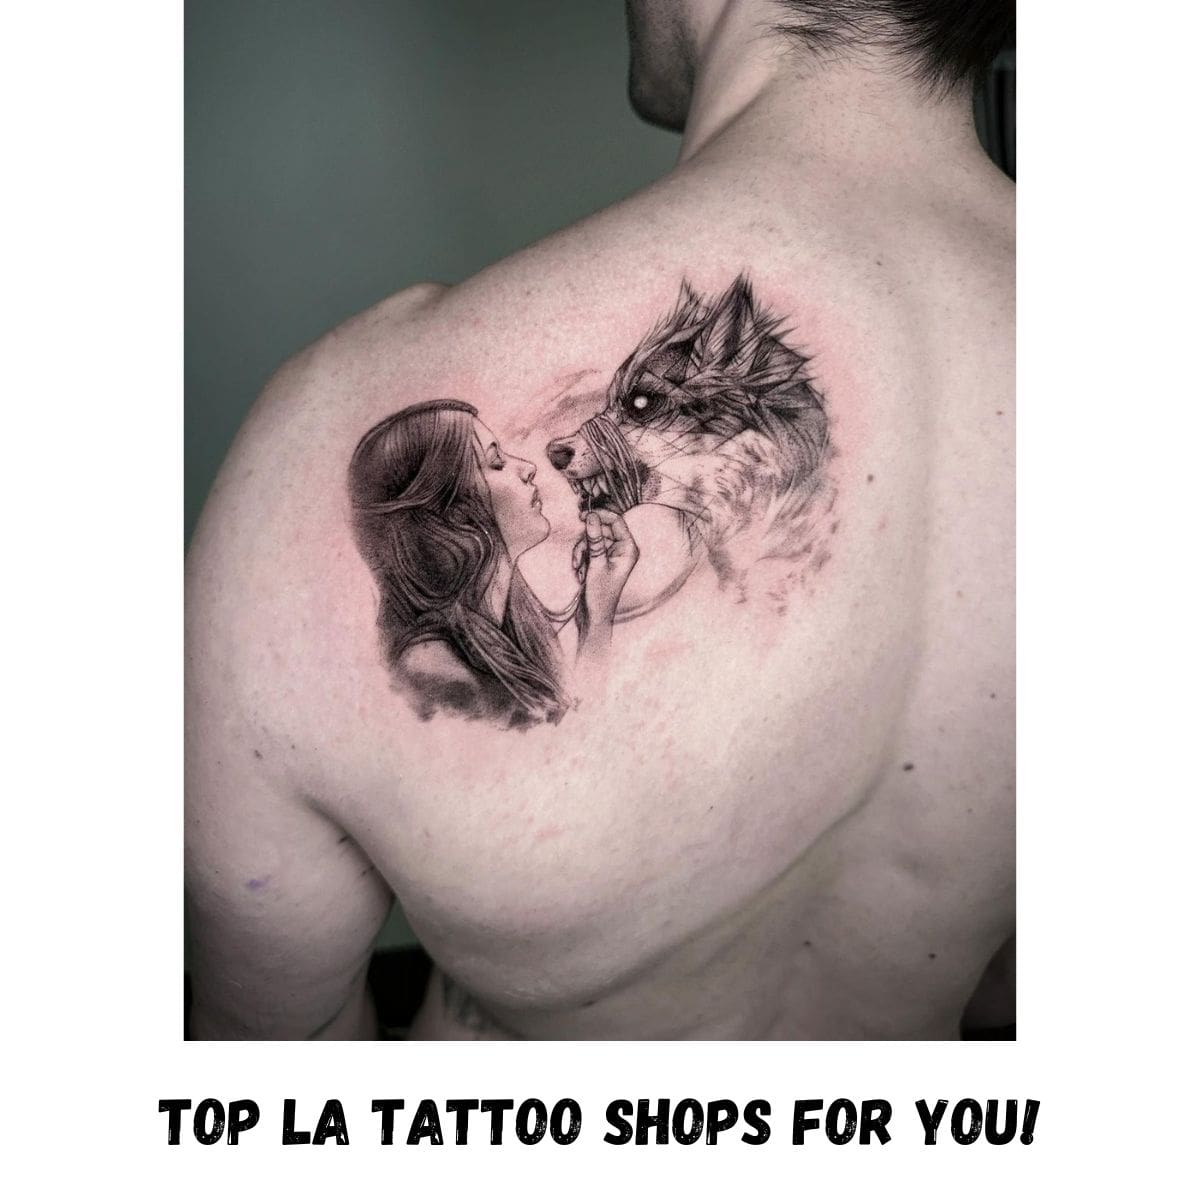 What Age Can You Get a Tattoo or Body Piercing